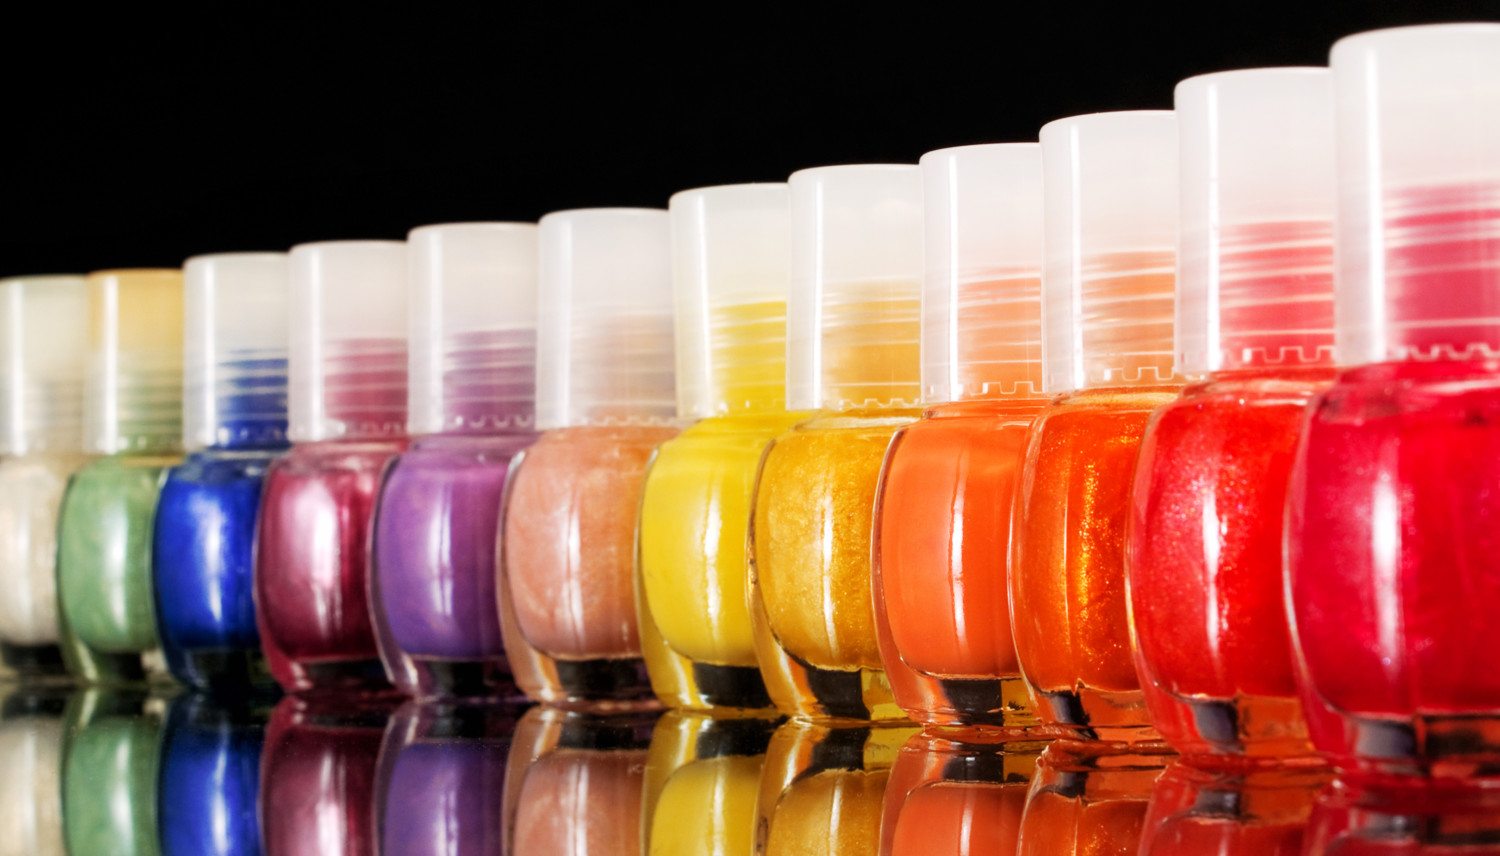 Nail Polish Can Detect 'Date Rape' Drugs In Women's Drinks - Simplemost